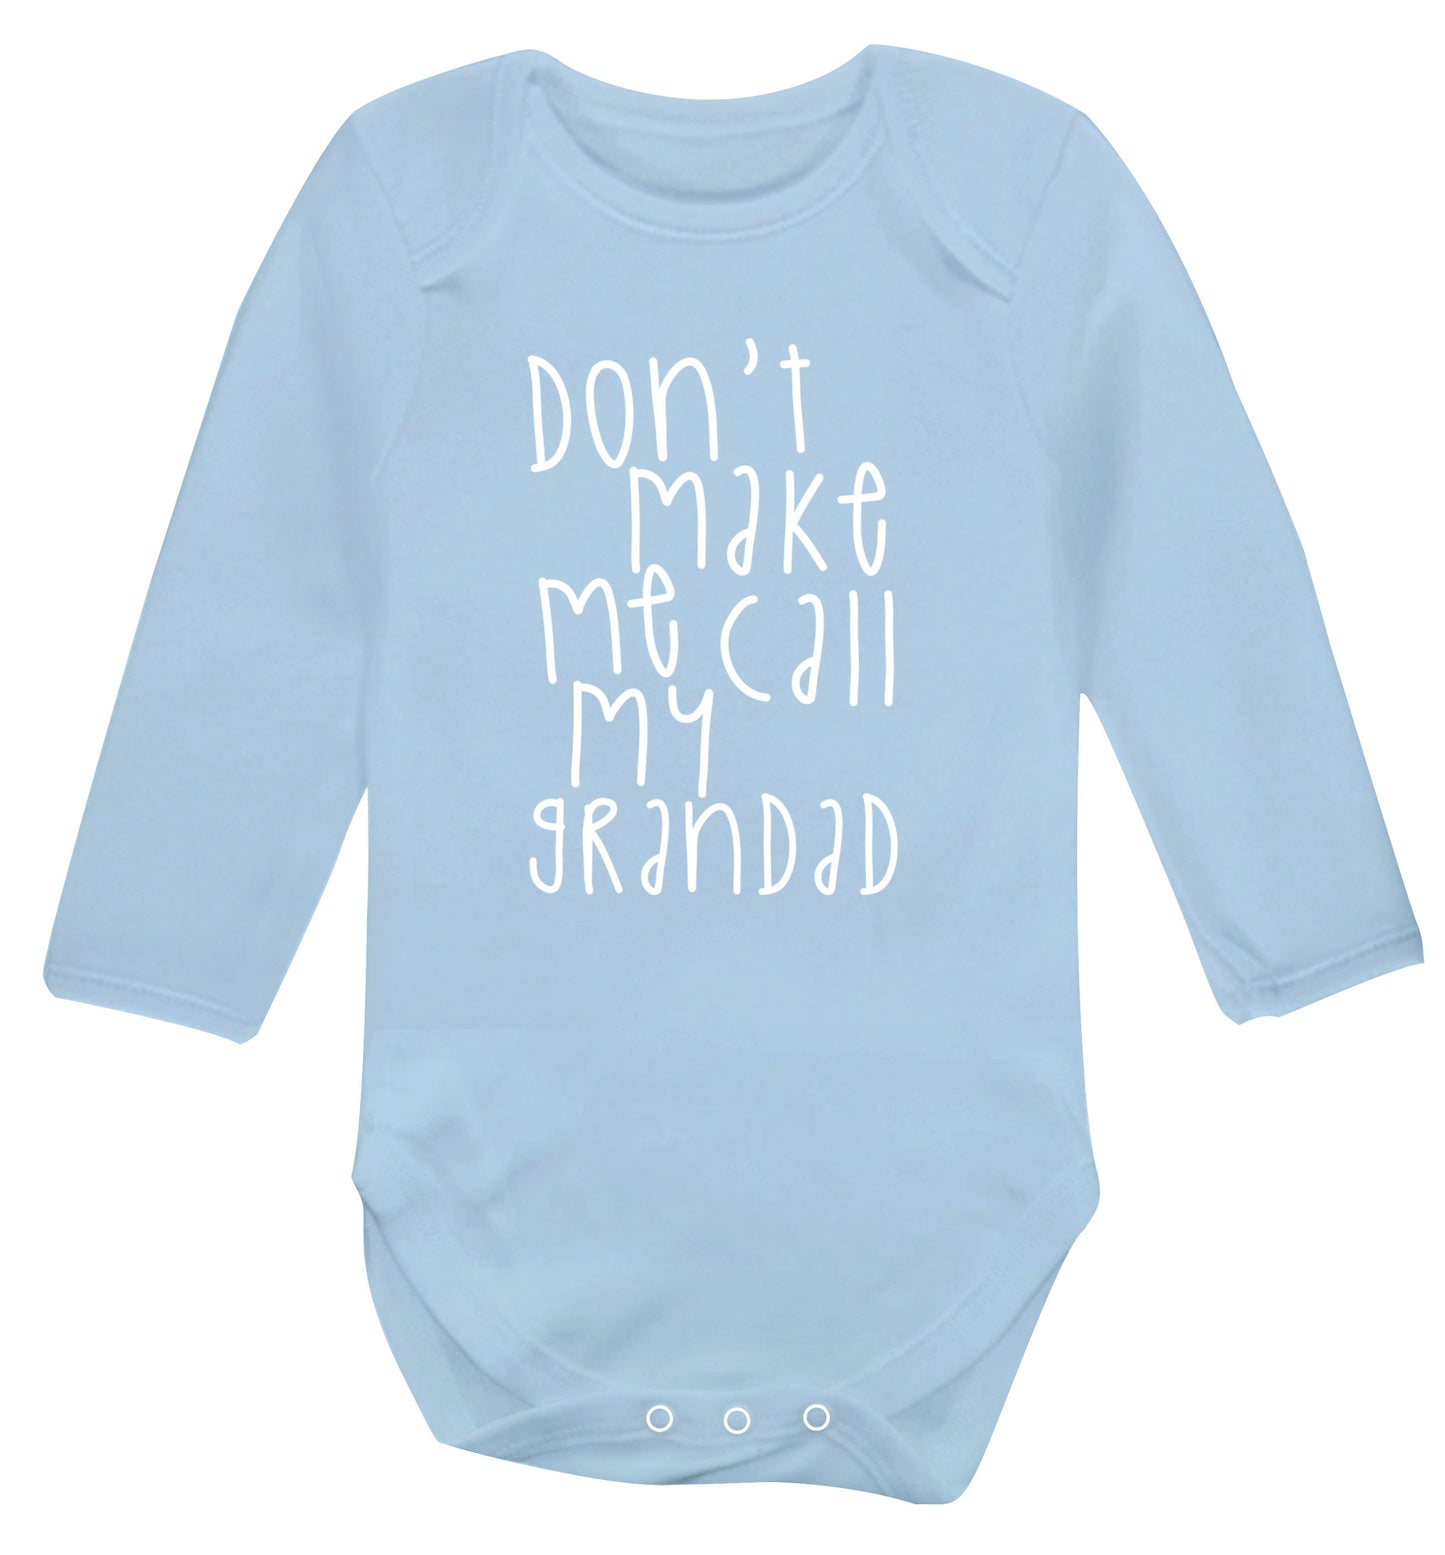 Don't make me call my grandad Baby Vest long sleeved pale blue 6-12 months